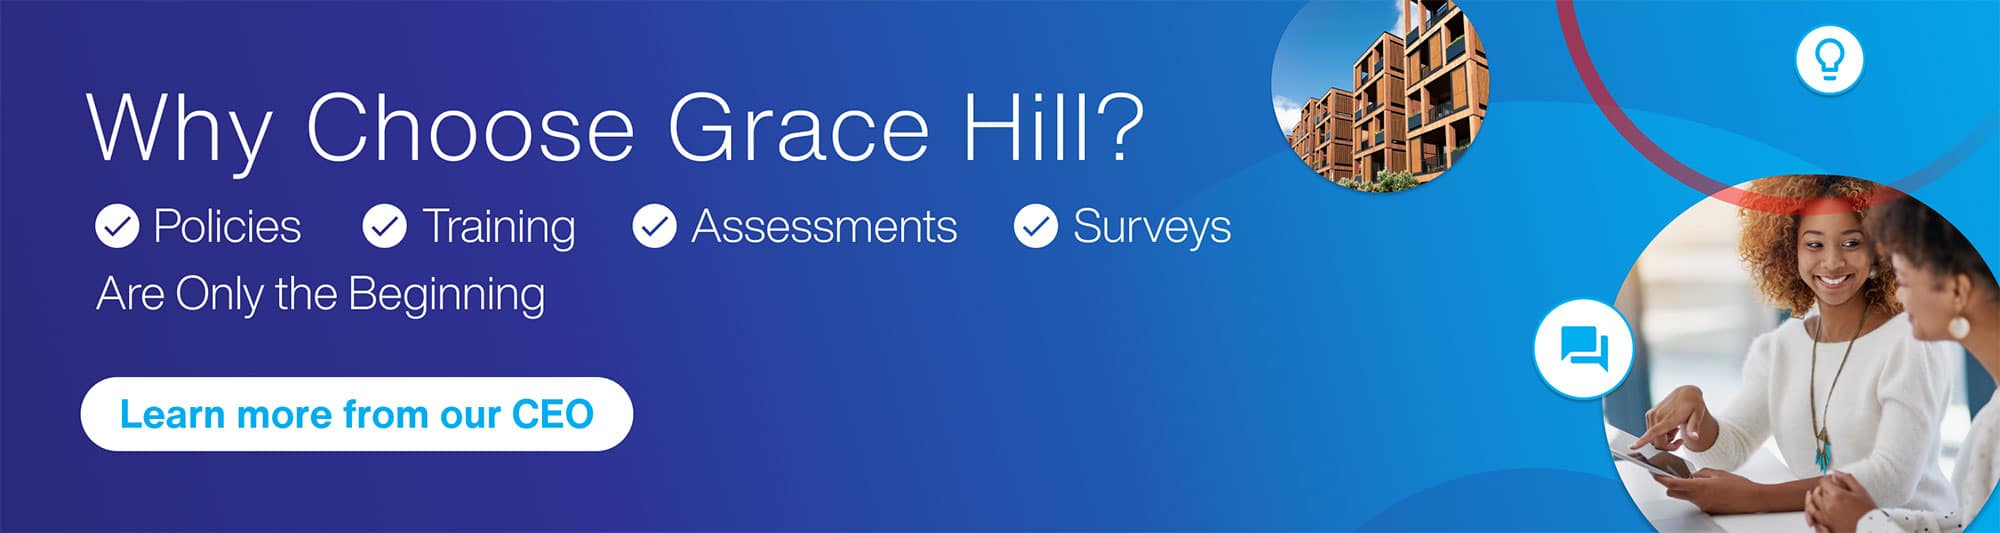 Why-Grace-Hill-Homepage-Banner